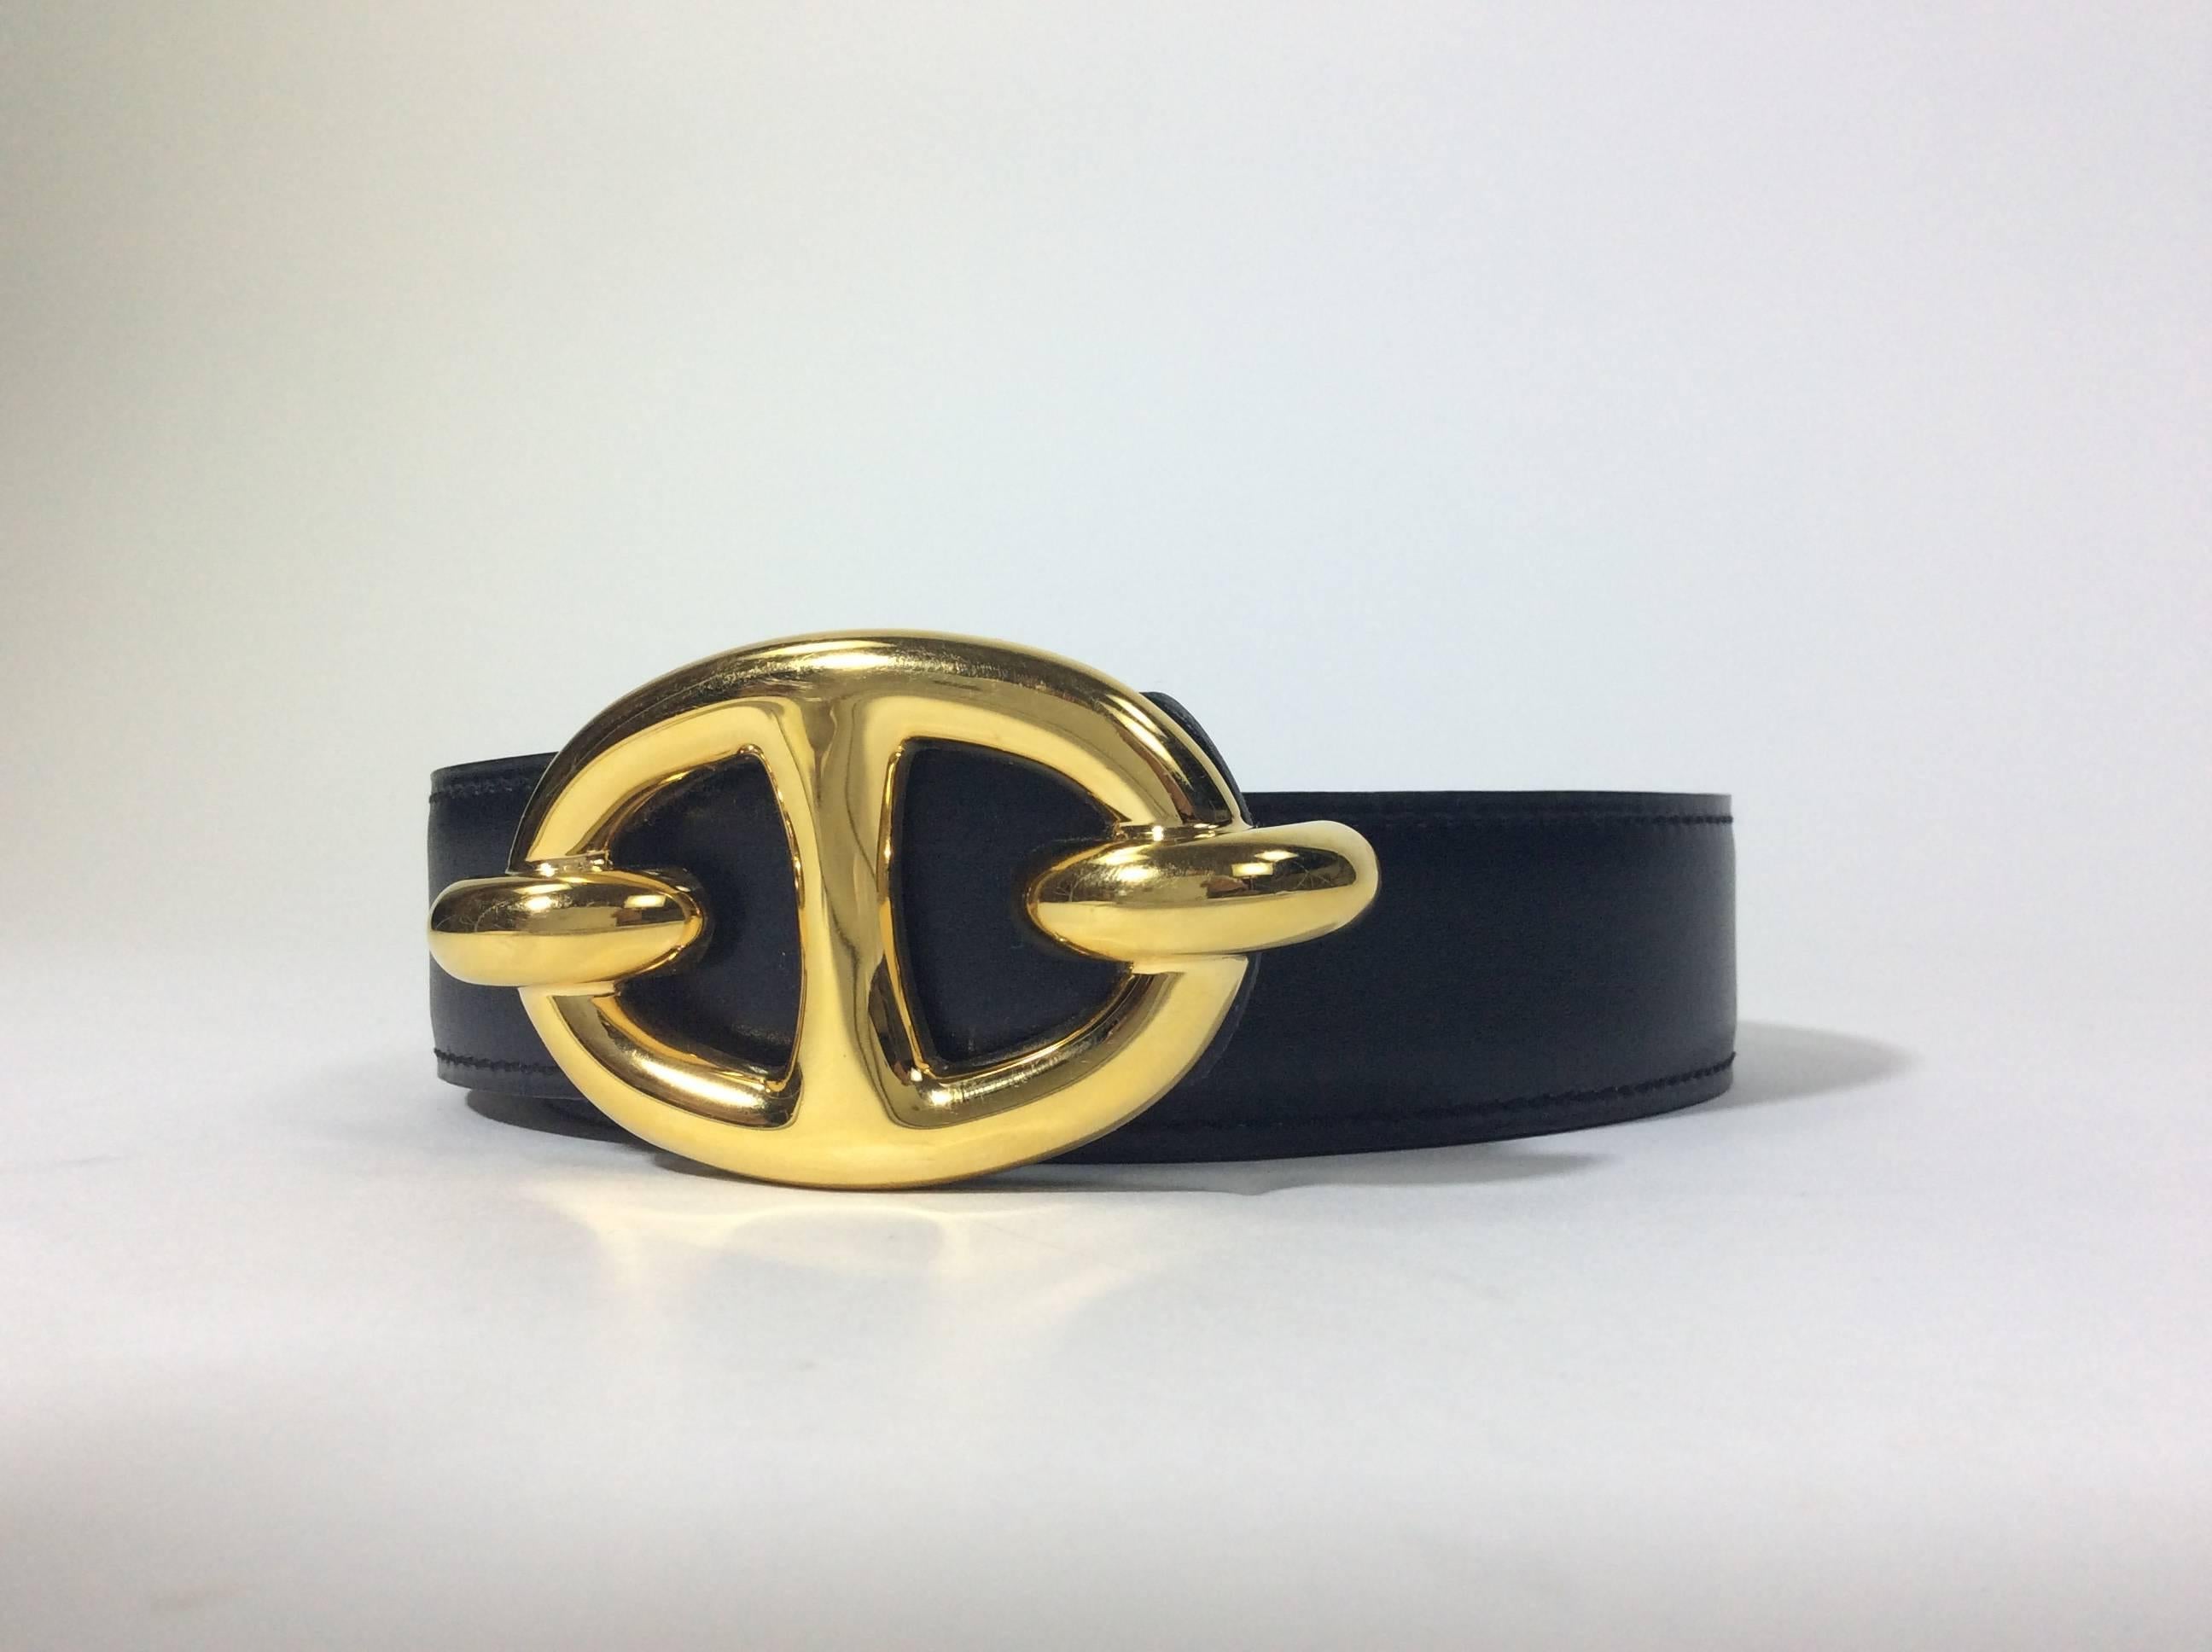 Hermes Black and Tan Reversible Belt with Gold Hardware In Excellent Condition For Sale In Narberth, PA